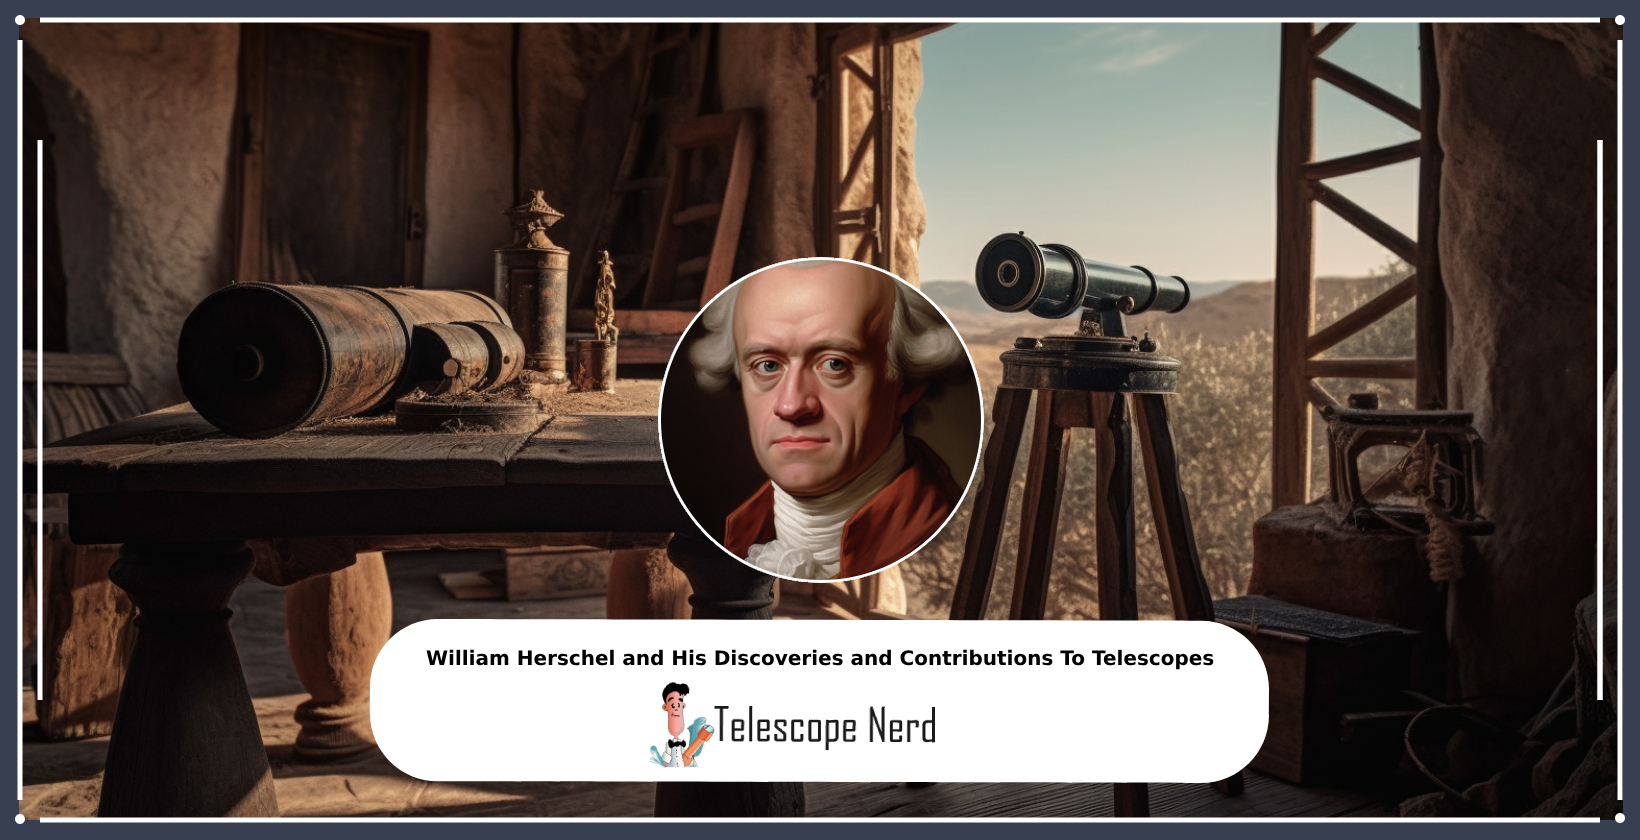 William Herschel astronomer and his contributions to telescopes